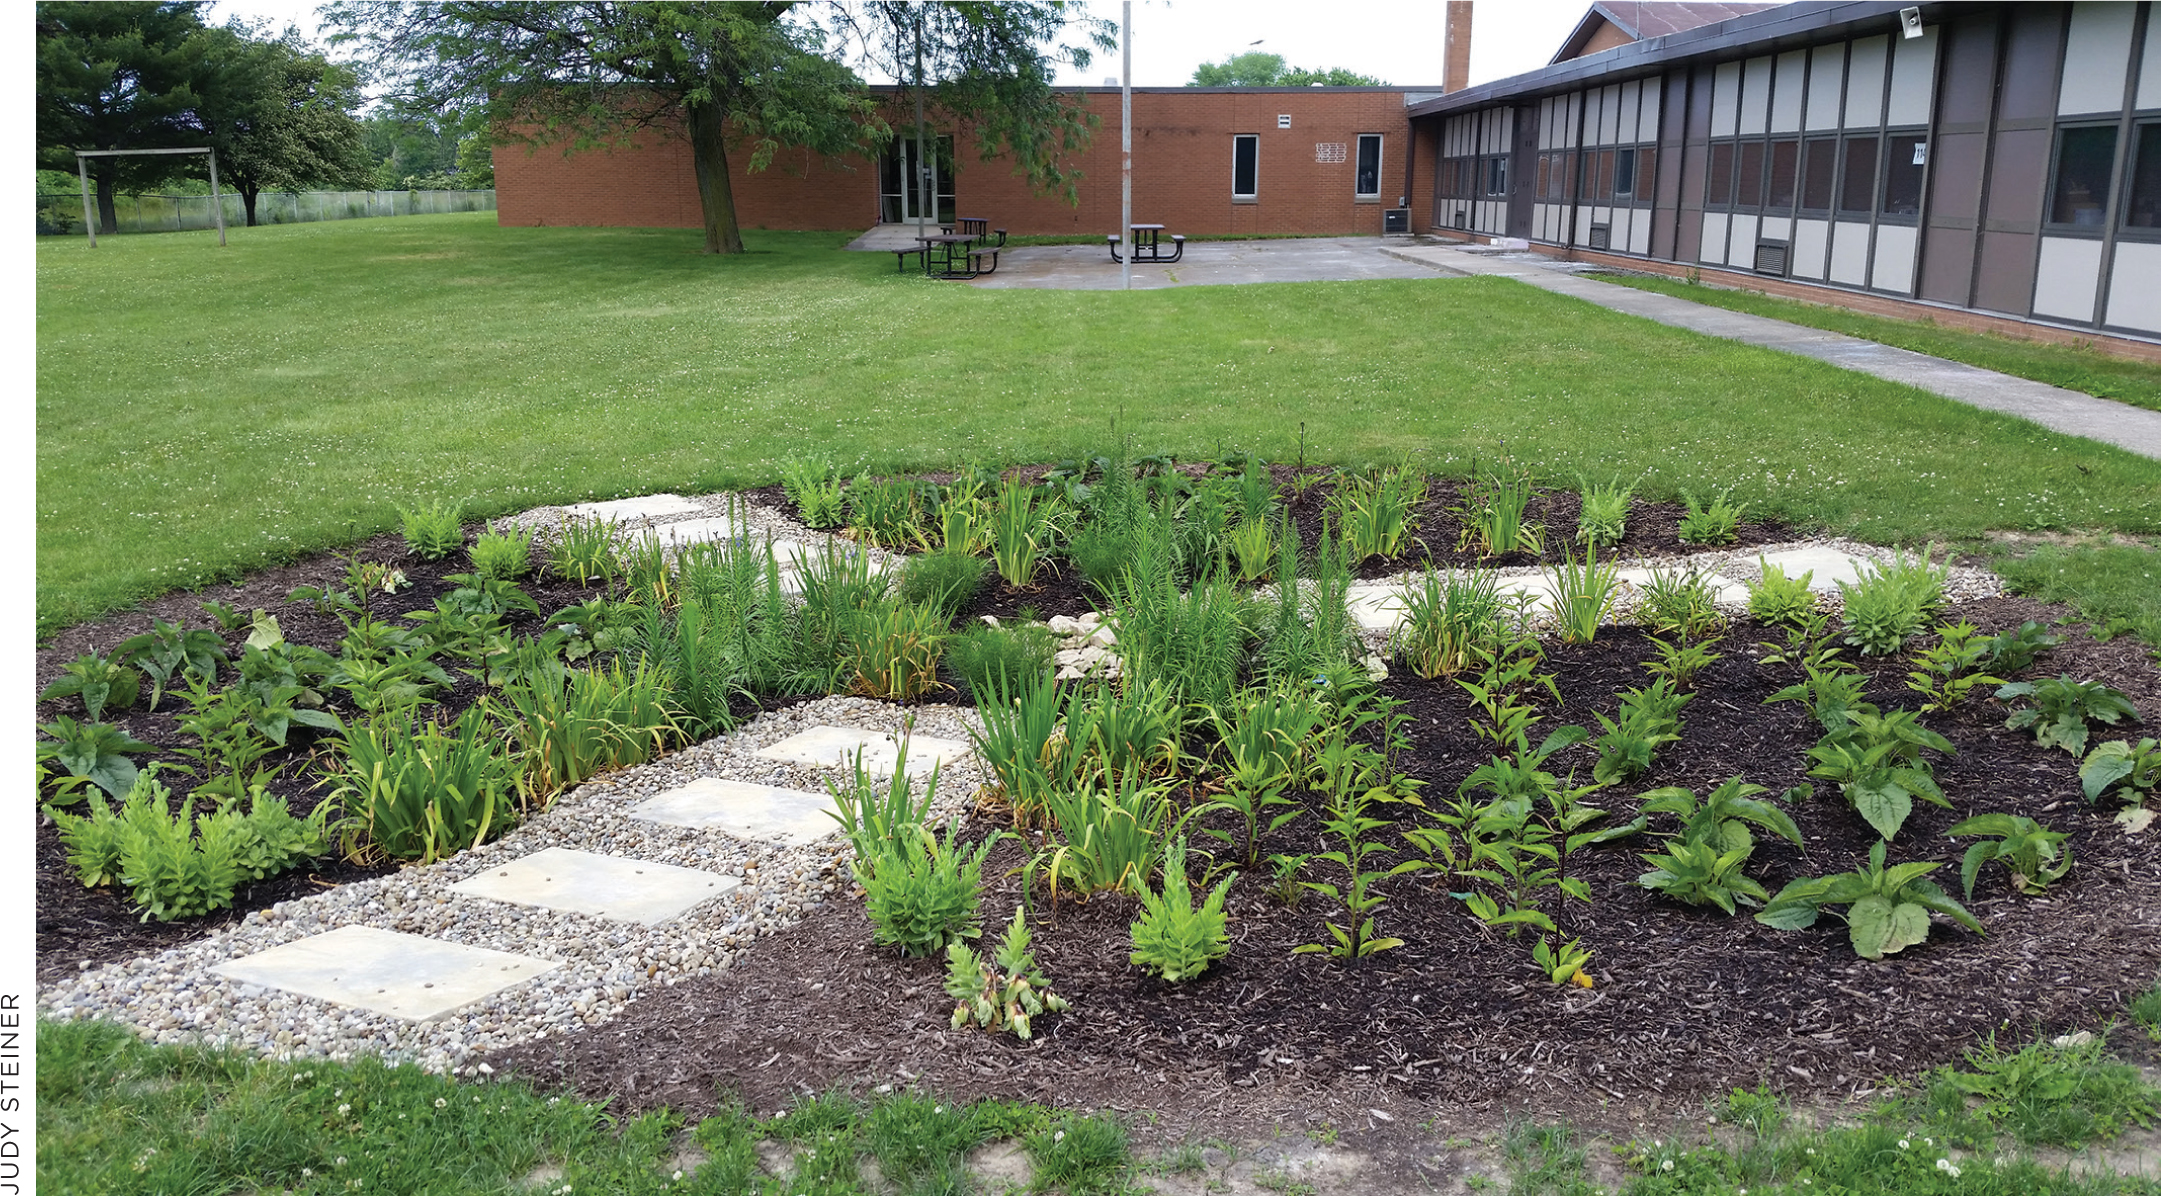 In lieu of a pollinator garden, students use planter boxes filled with native plant species.